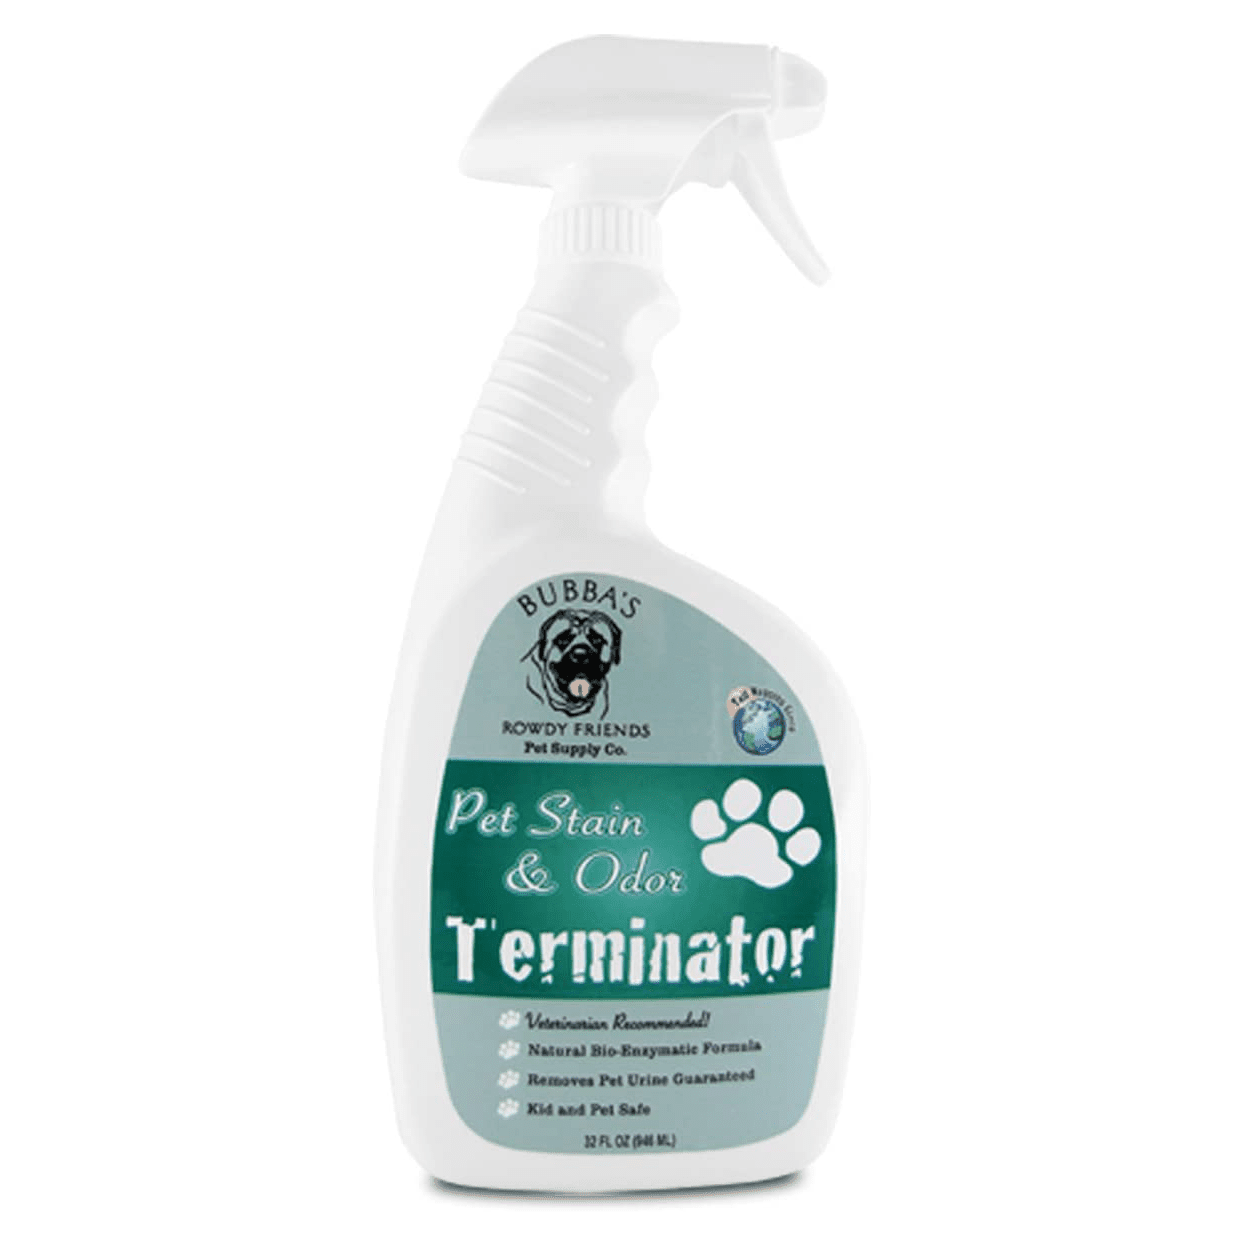 bubbas pet stain enzyme cleaner